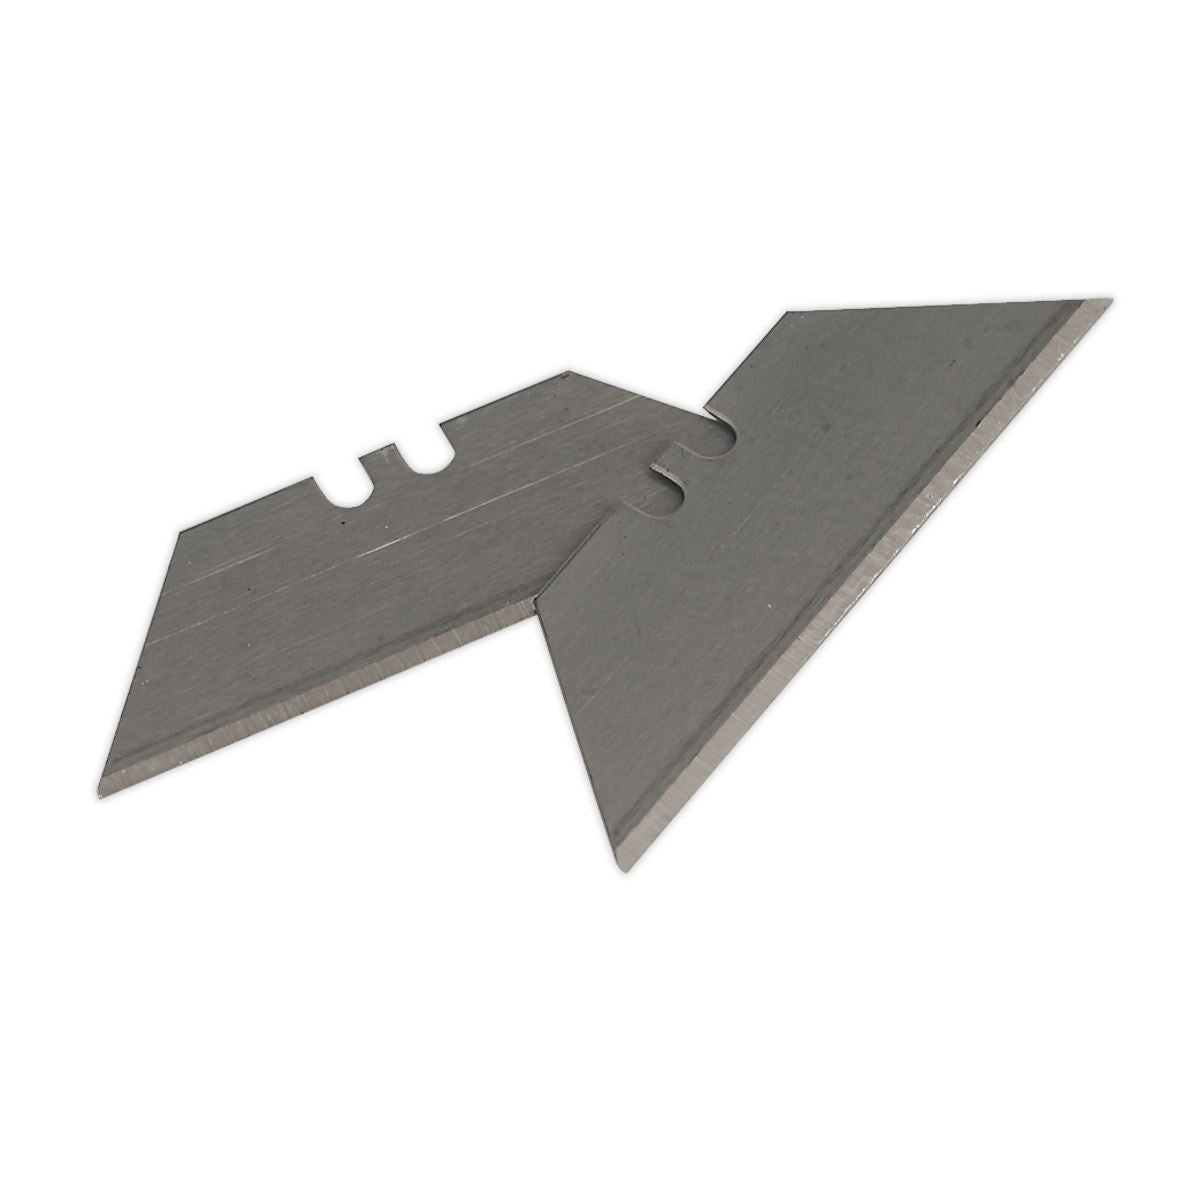 Sealey Utility Knife Blade - Pack of 10